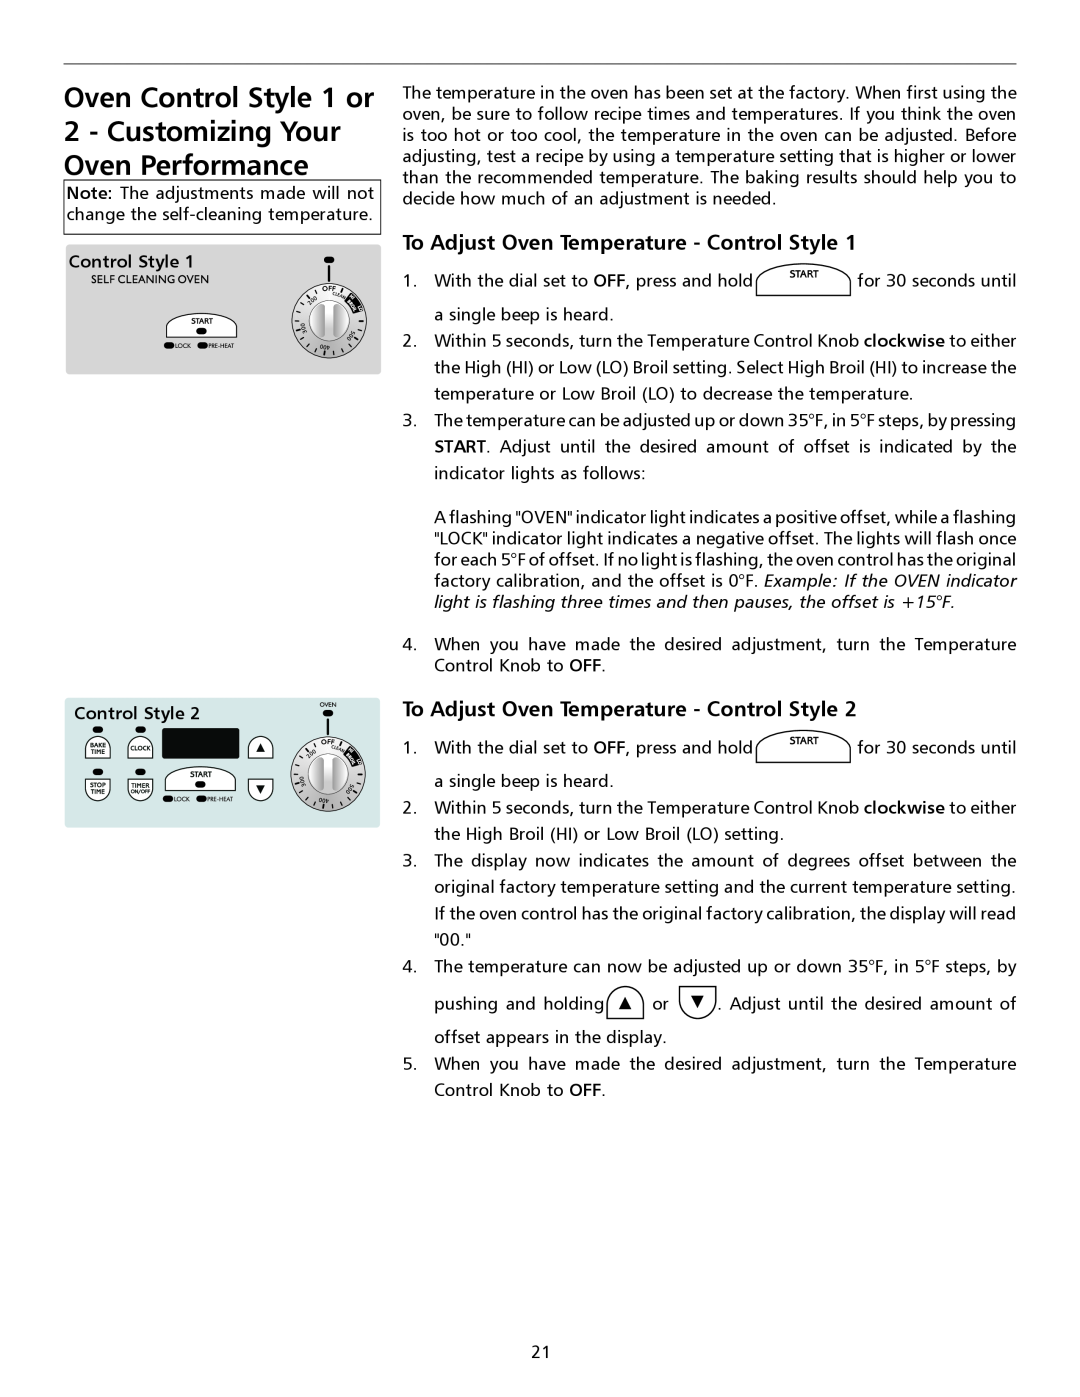 Frigidaire pmn important safety instructions To Adjust Oven Temperature - Control Style, Control Style Control Style 